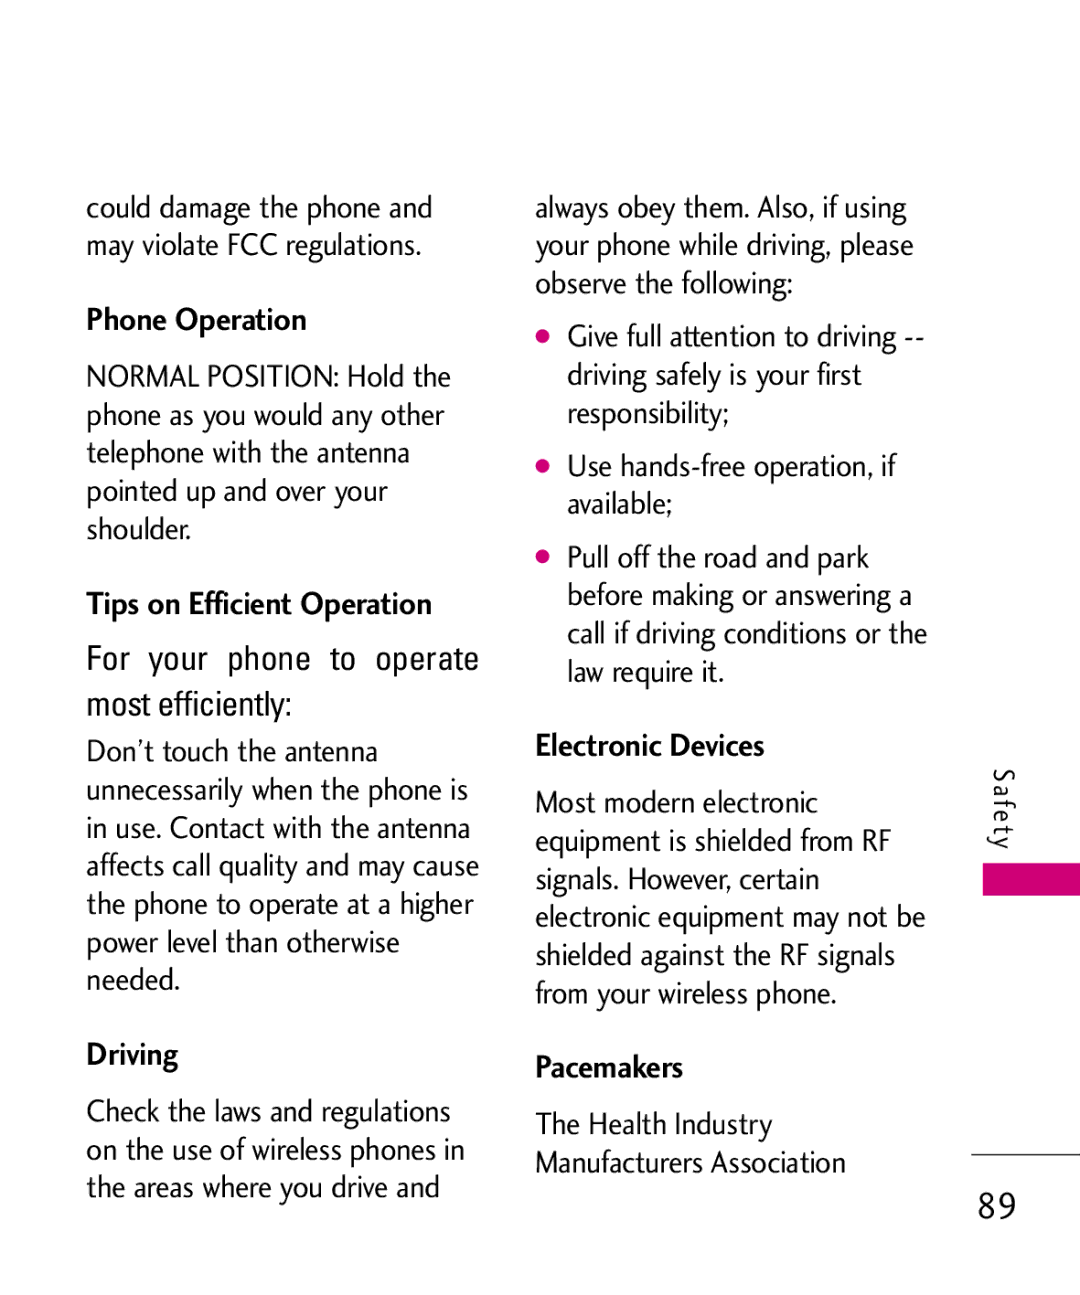 LG Electronics Glimmer manual Phone Operation, Tips on Efficient Operation, Driving, Electronic Devices, Pacemakers 